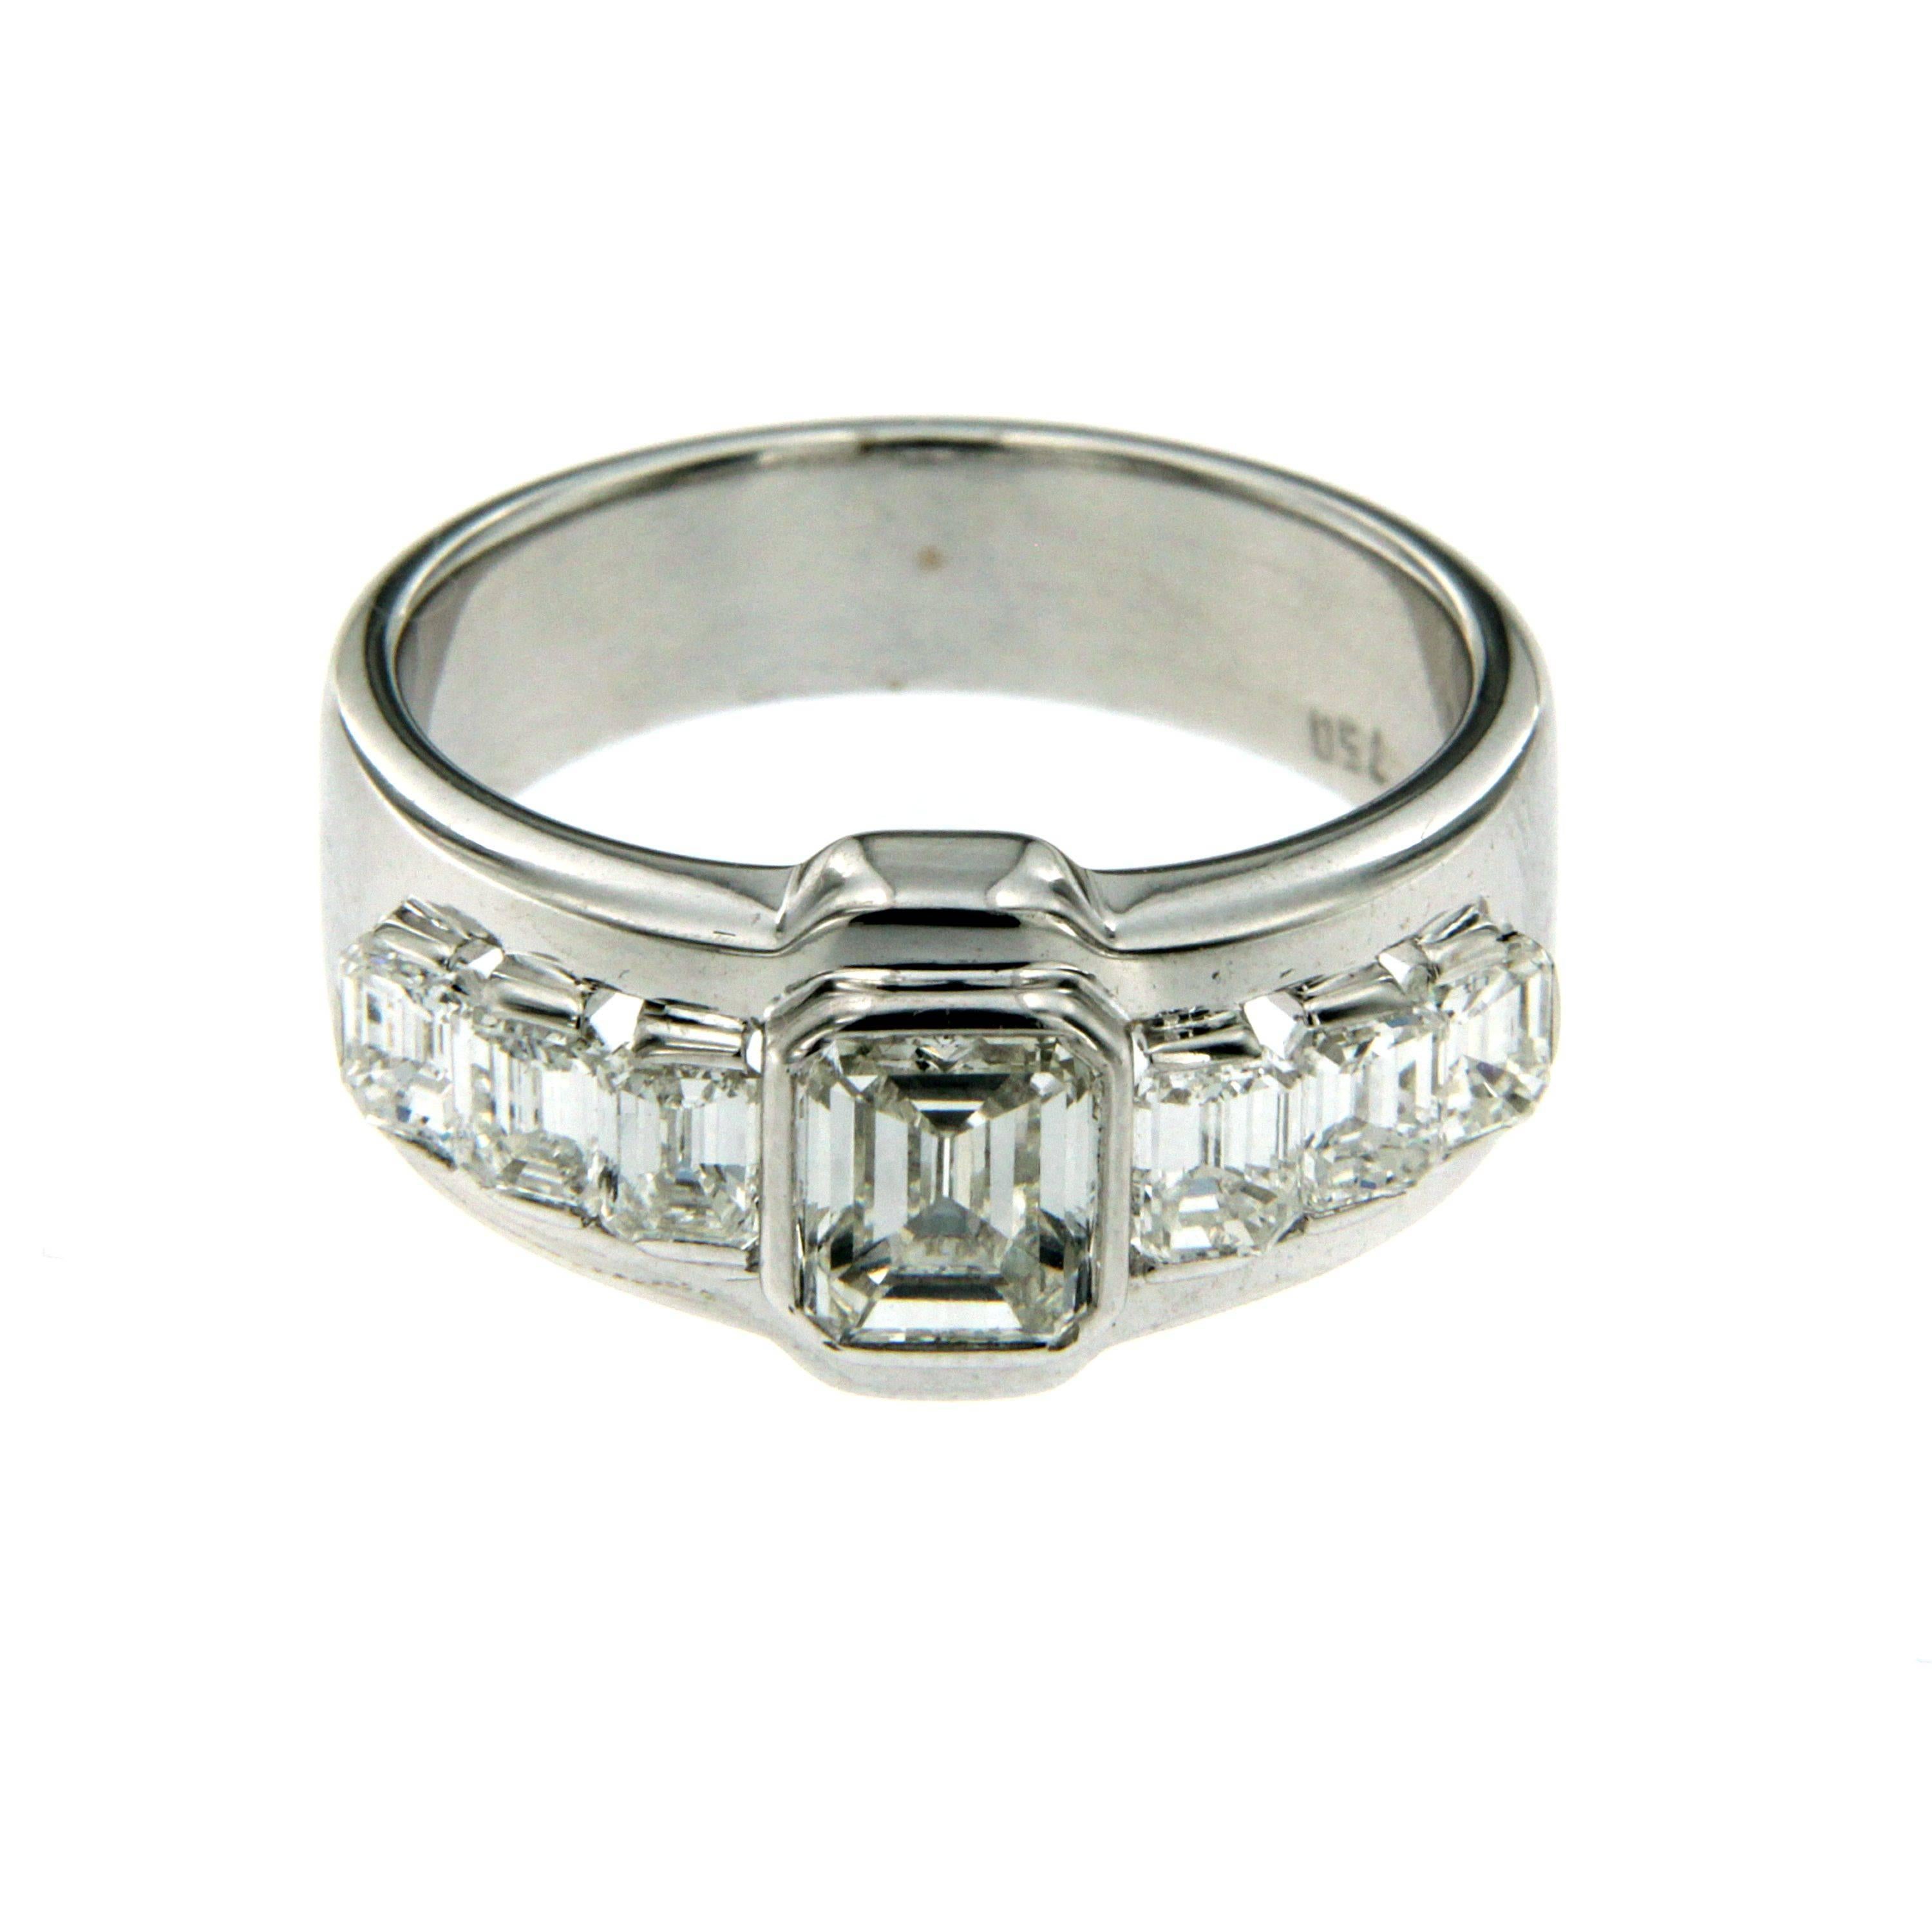 An exquisite engagement ring set in 18k white Gold featuring a 0.90 ct  diamond flanked on each side by 1.00 cts diamonds. 
All diamonds are square Emerald-cut  D color IF clarity.
This ring is from our own production.

CONDITION: Brand New
METAL: